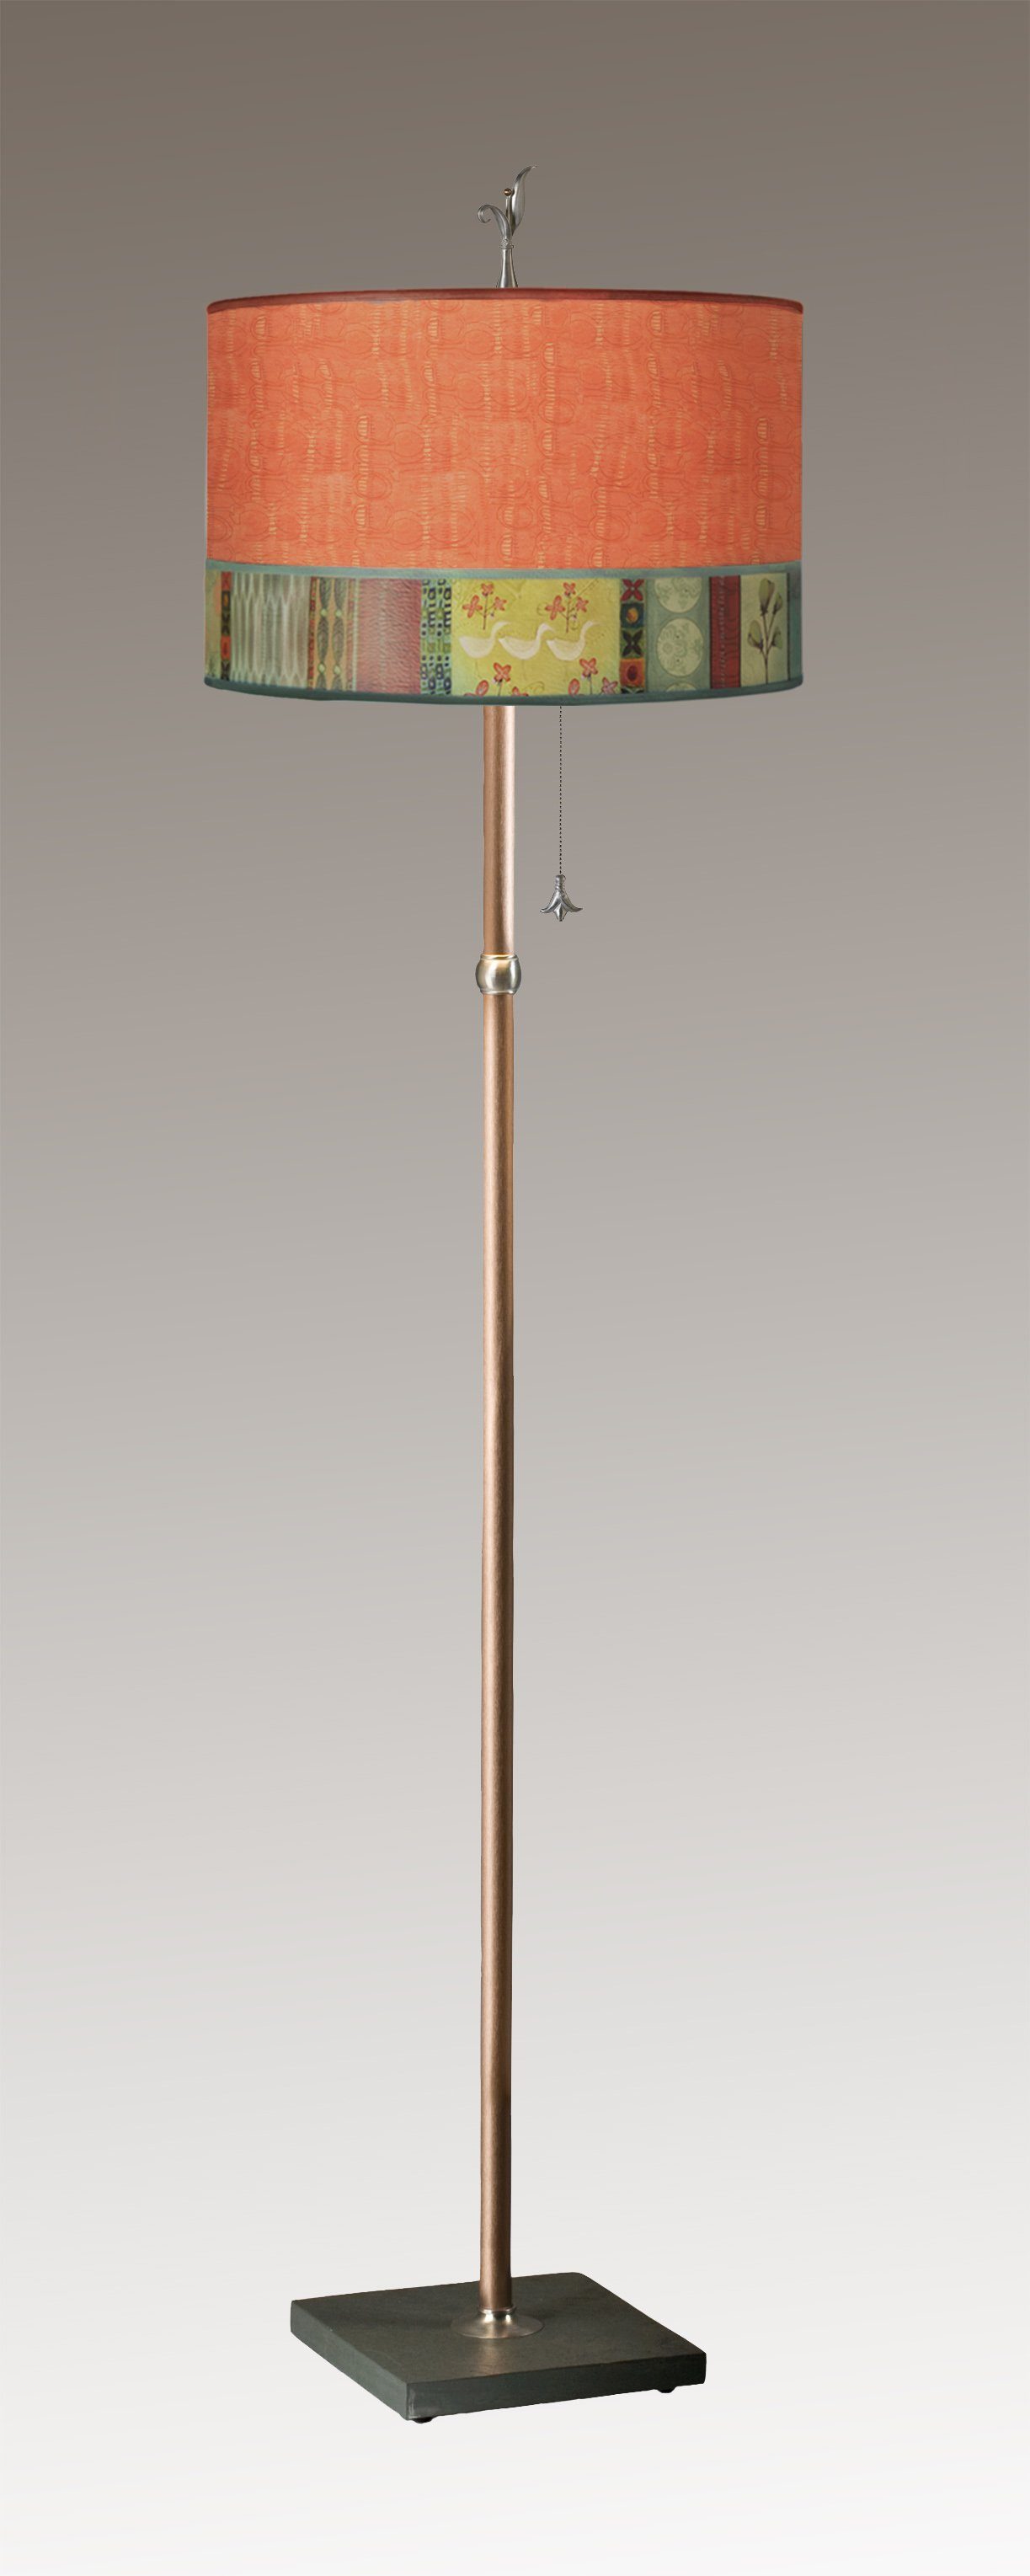 Janna Ugone & Co Floor Lamps Copper Floor Lamp with Large Drum Lampshade in Melody in Coral